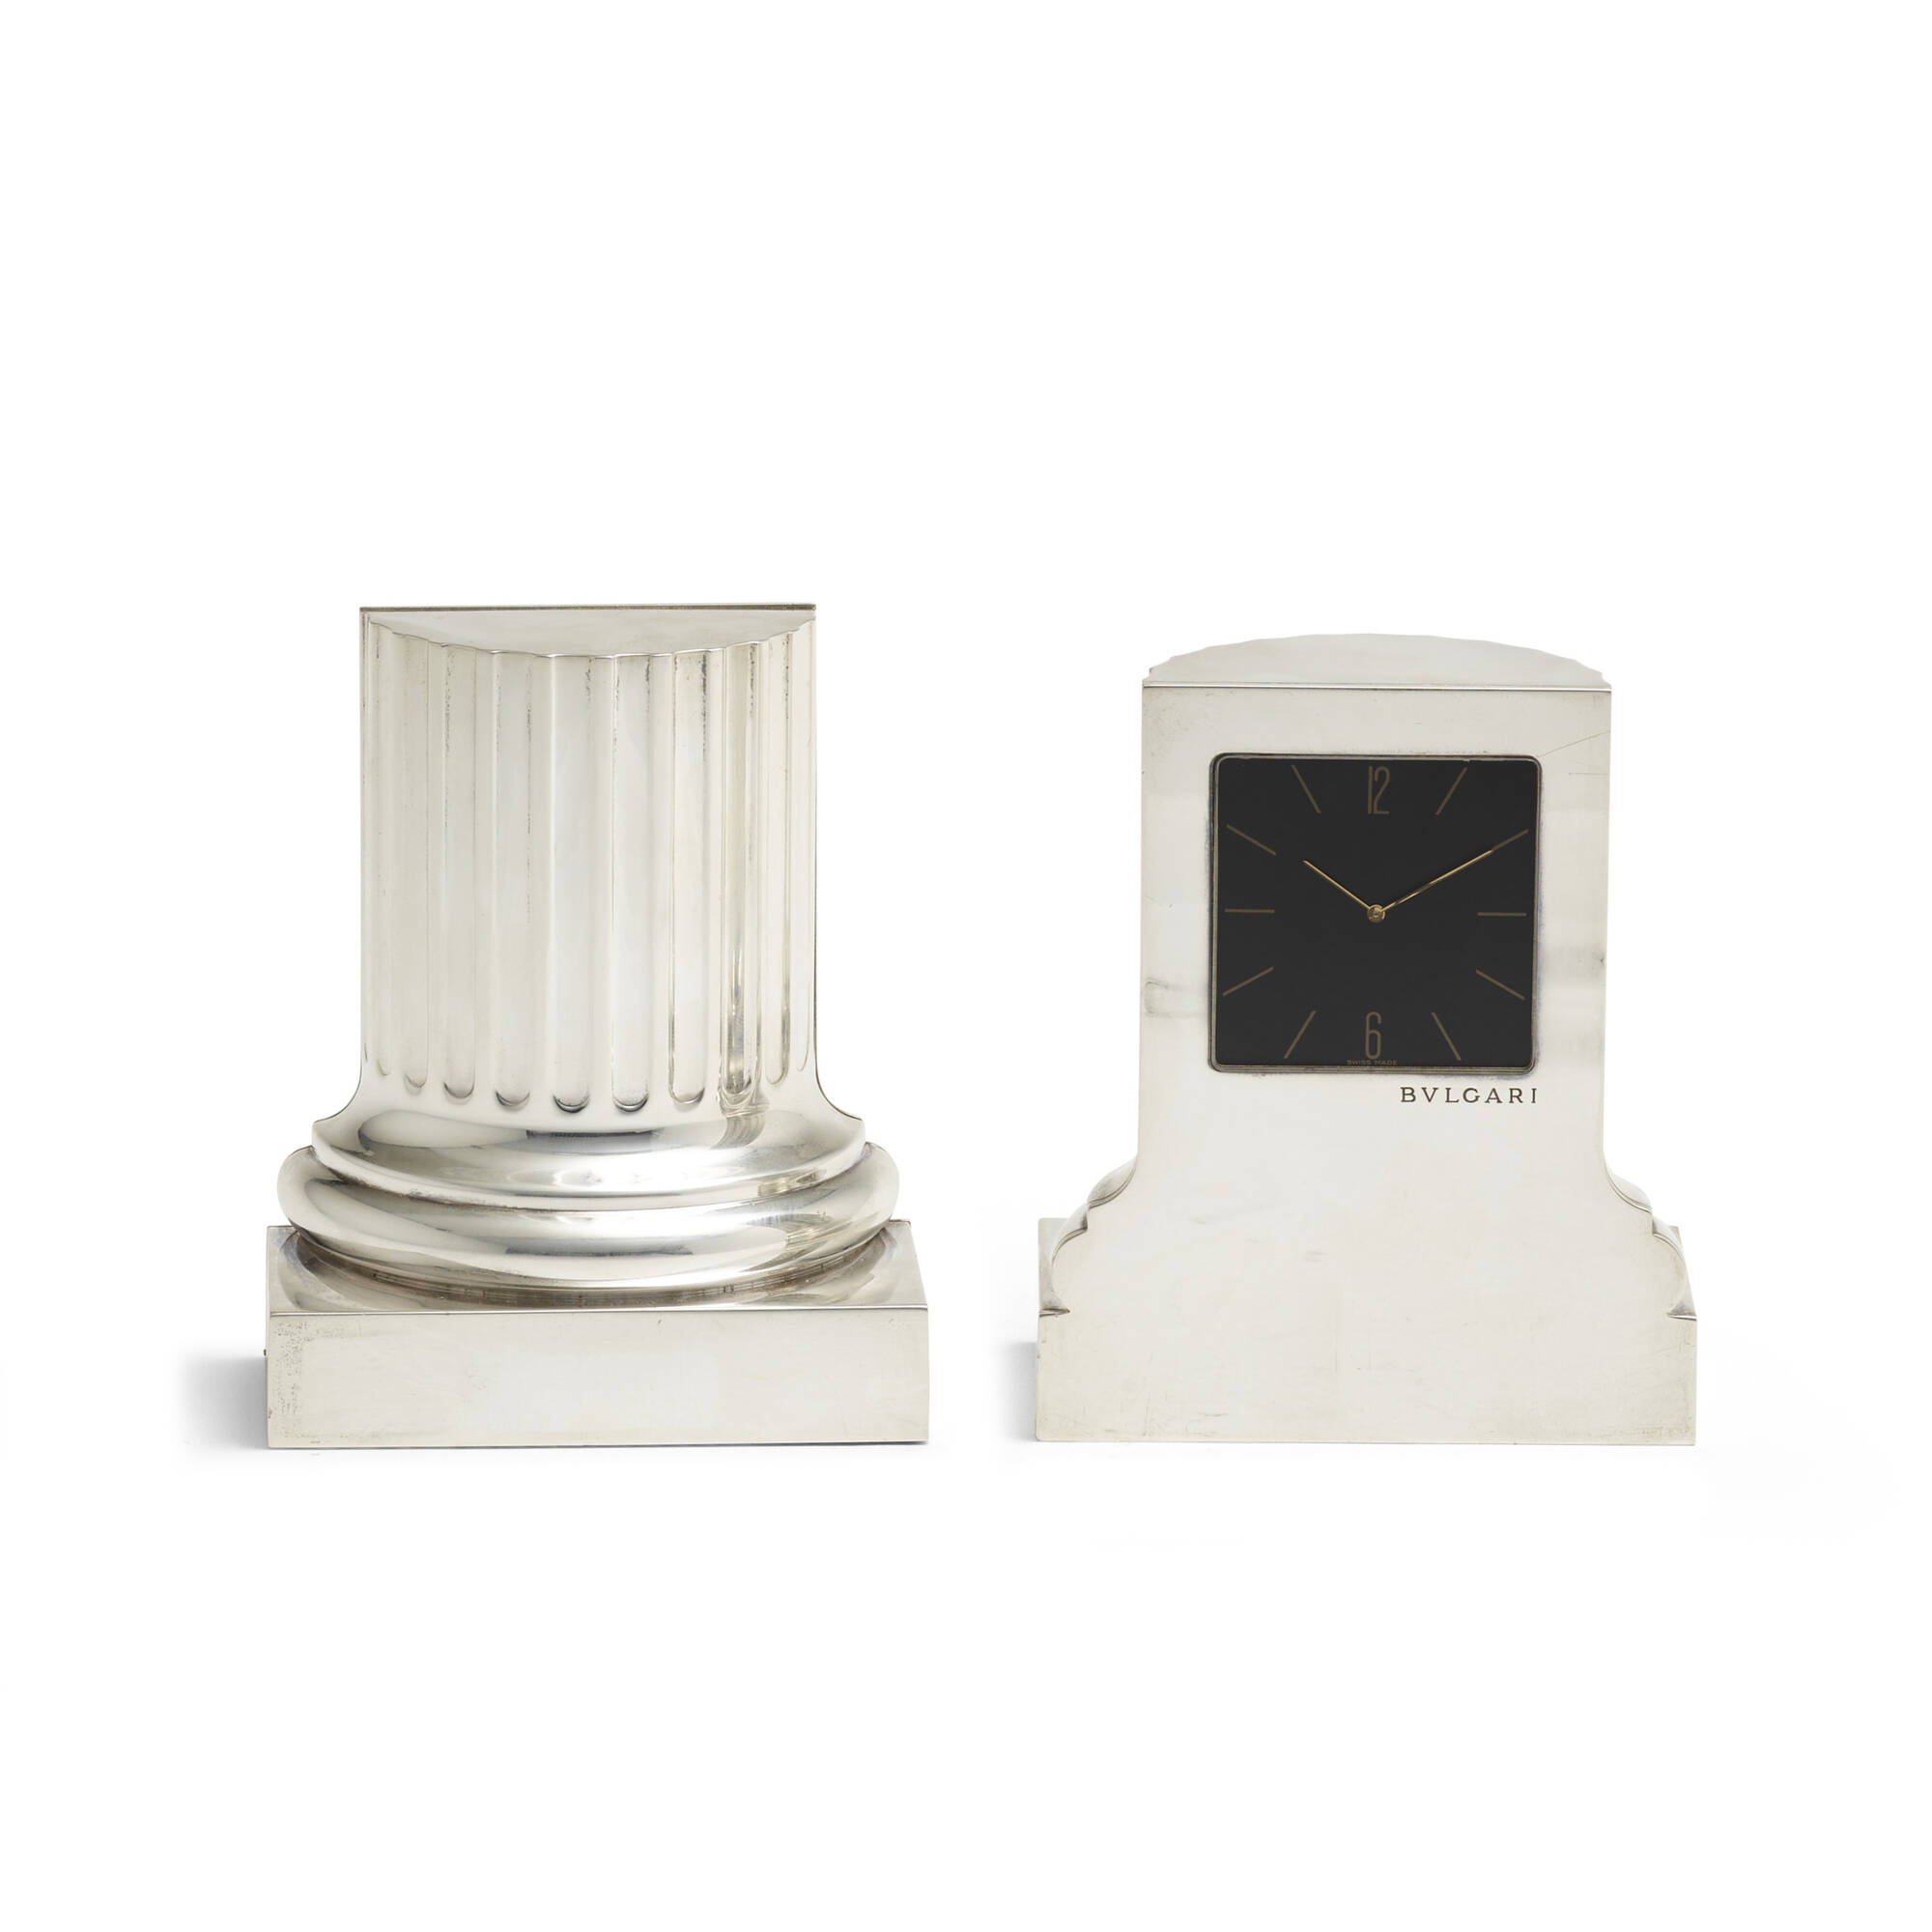 181: BULGARI, Column table clocks, set of two < A Century of Luxury &  Design, 22 July 2020 < Auctions | Wright: Auctions of Art and Design